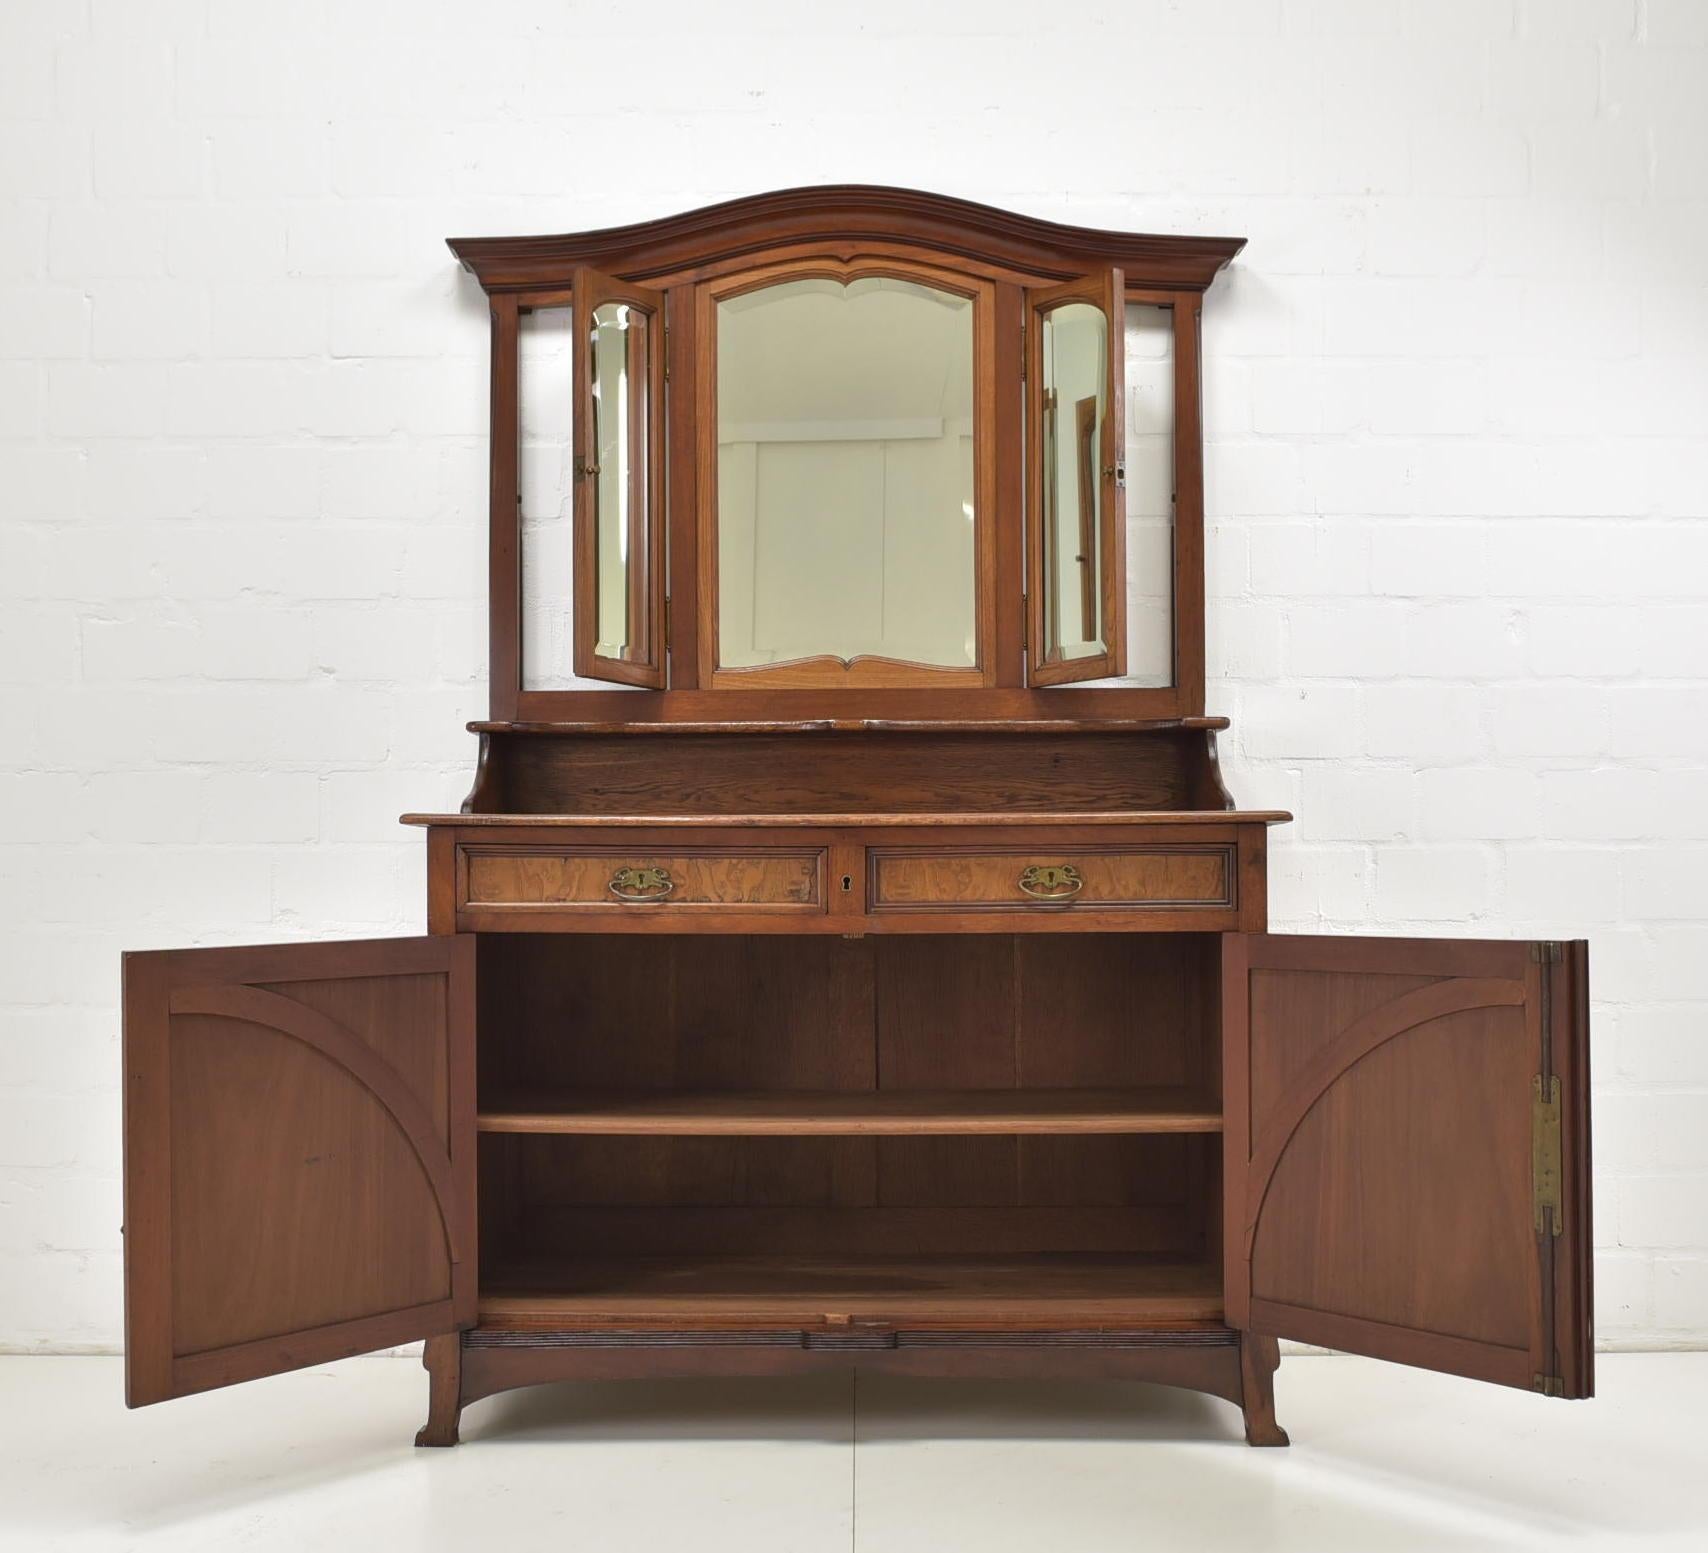 Mirror dresser restored Art Nouveau around 1915 mahogany

Features:
High quality
Heavy quality
Drawers pronged
Original fittings
Original bar lock
Original faceted mirrors
Outer mirrors foldable
Plate was once renewed in solid oak
Organic